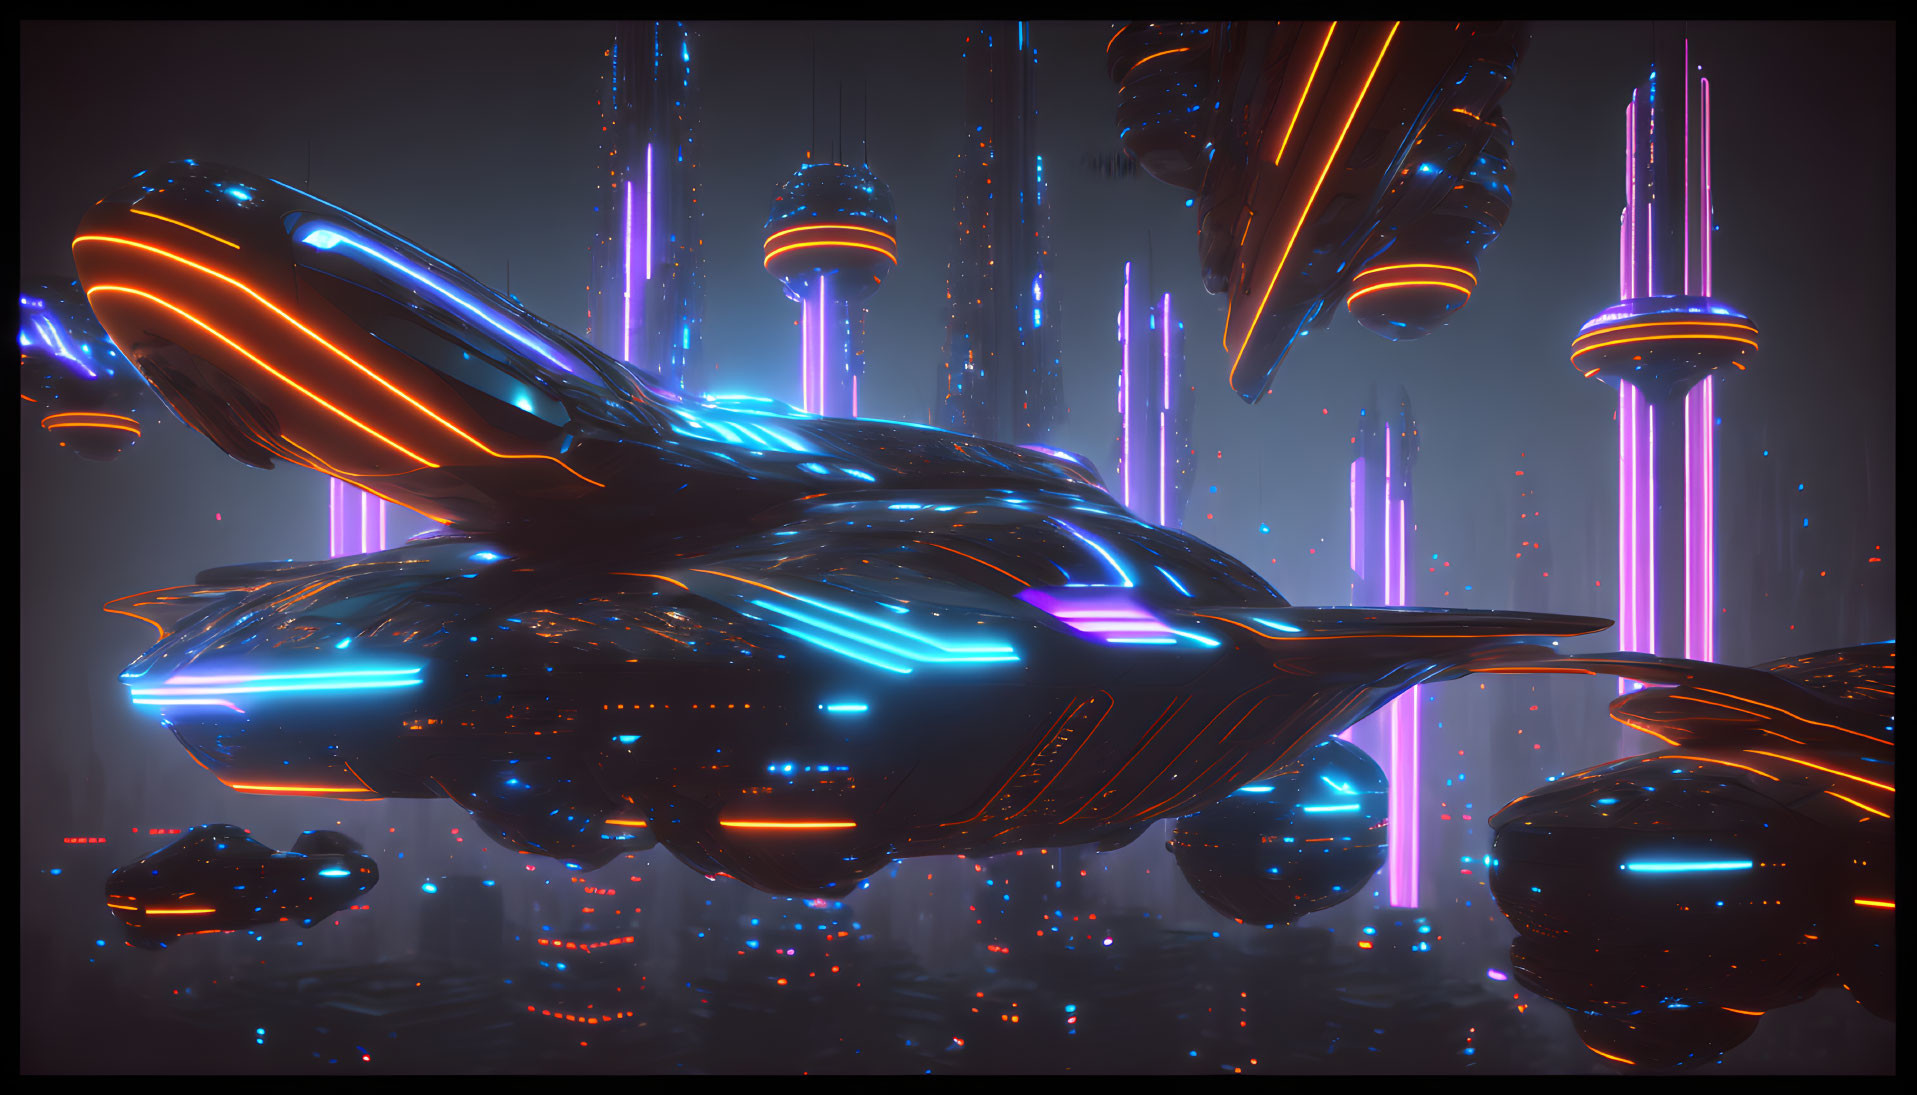 Futuristic spaceship with neon blue lights in cityscape.